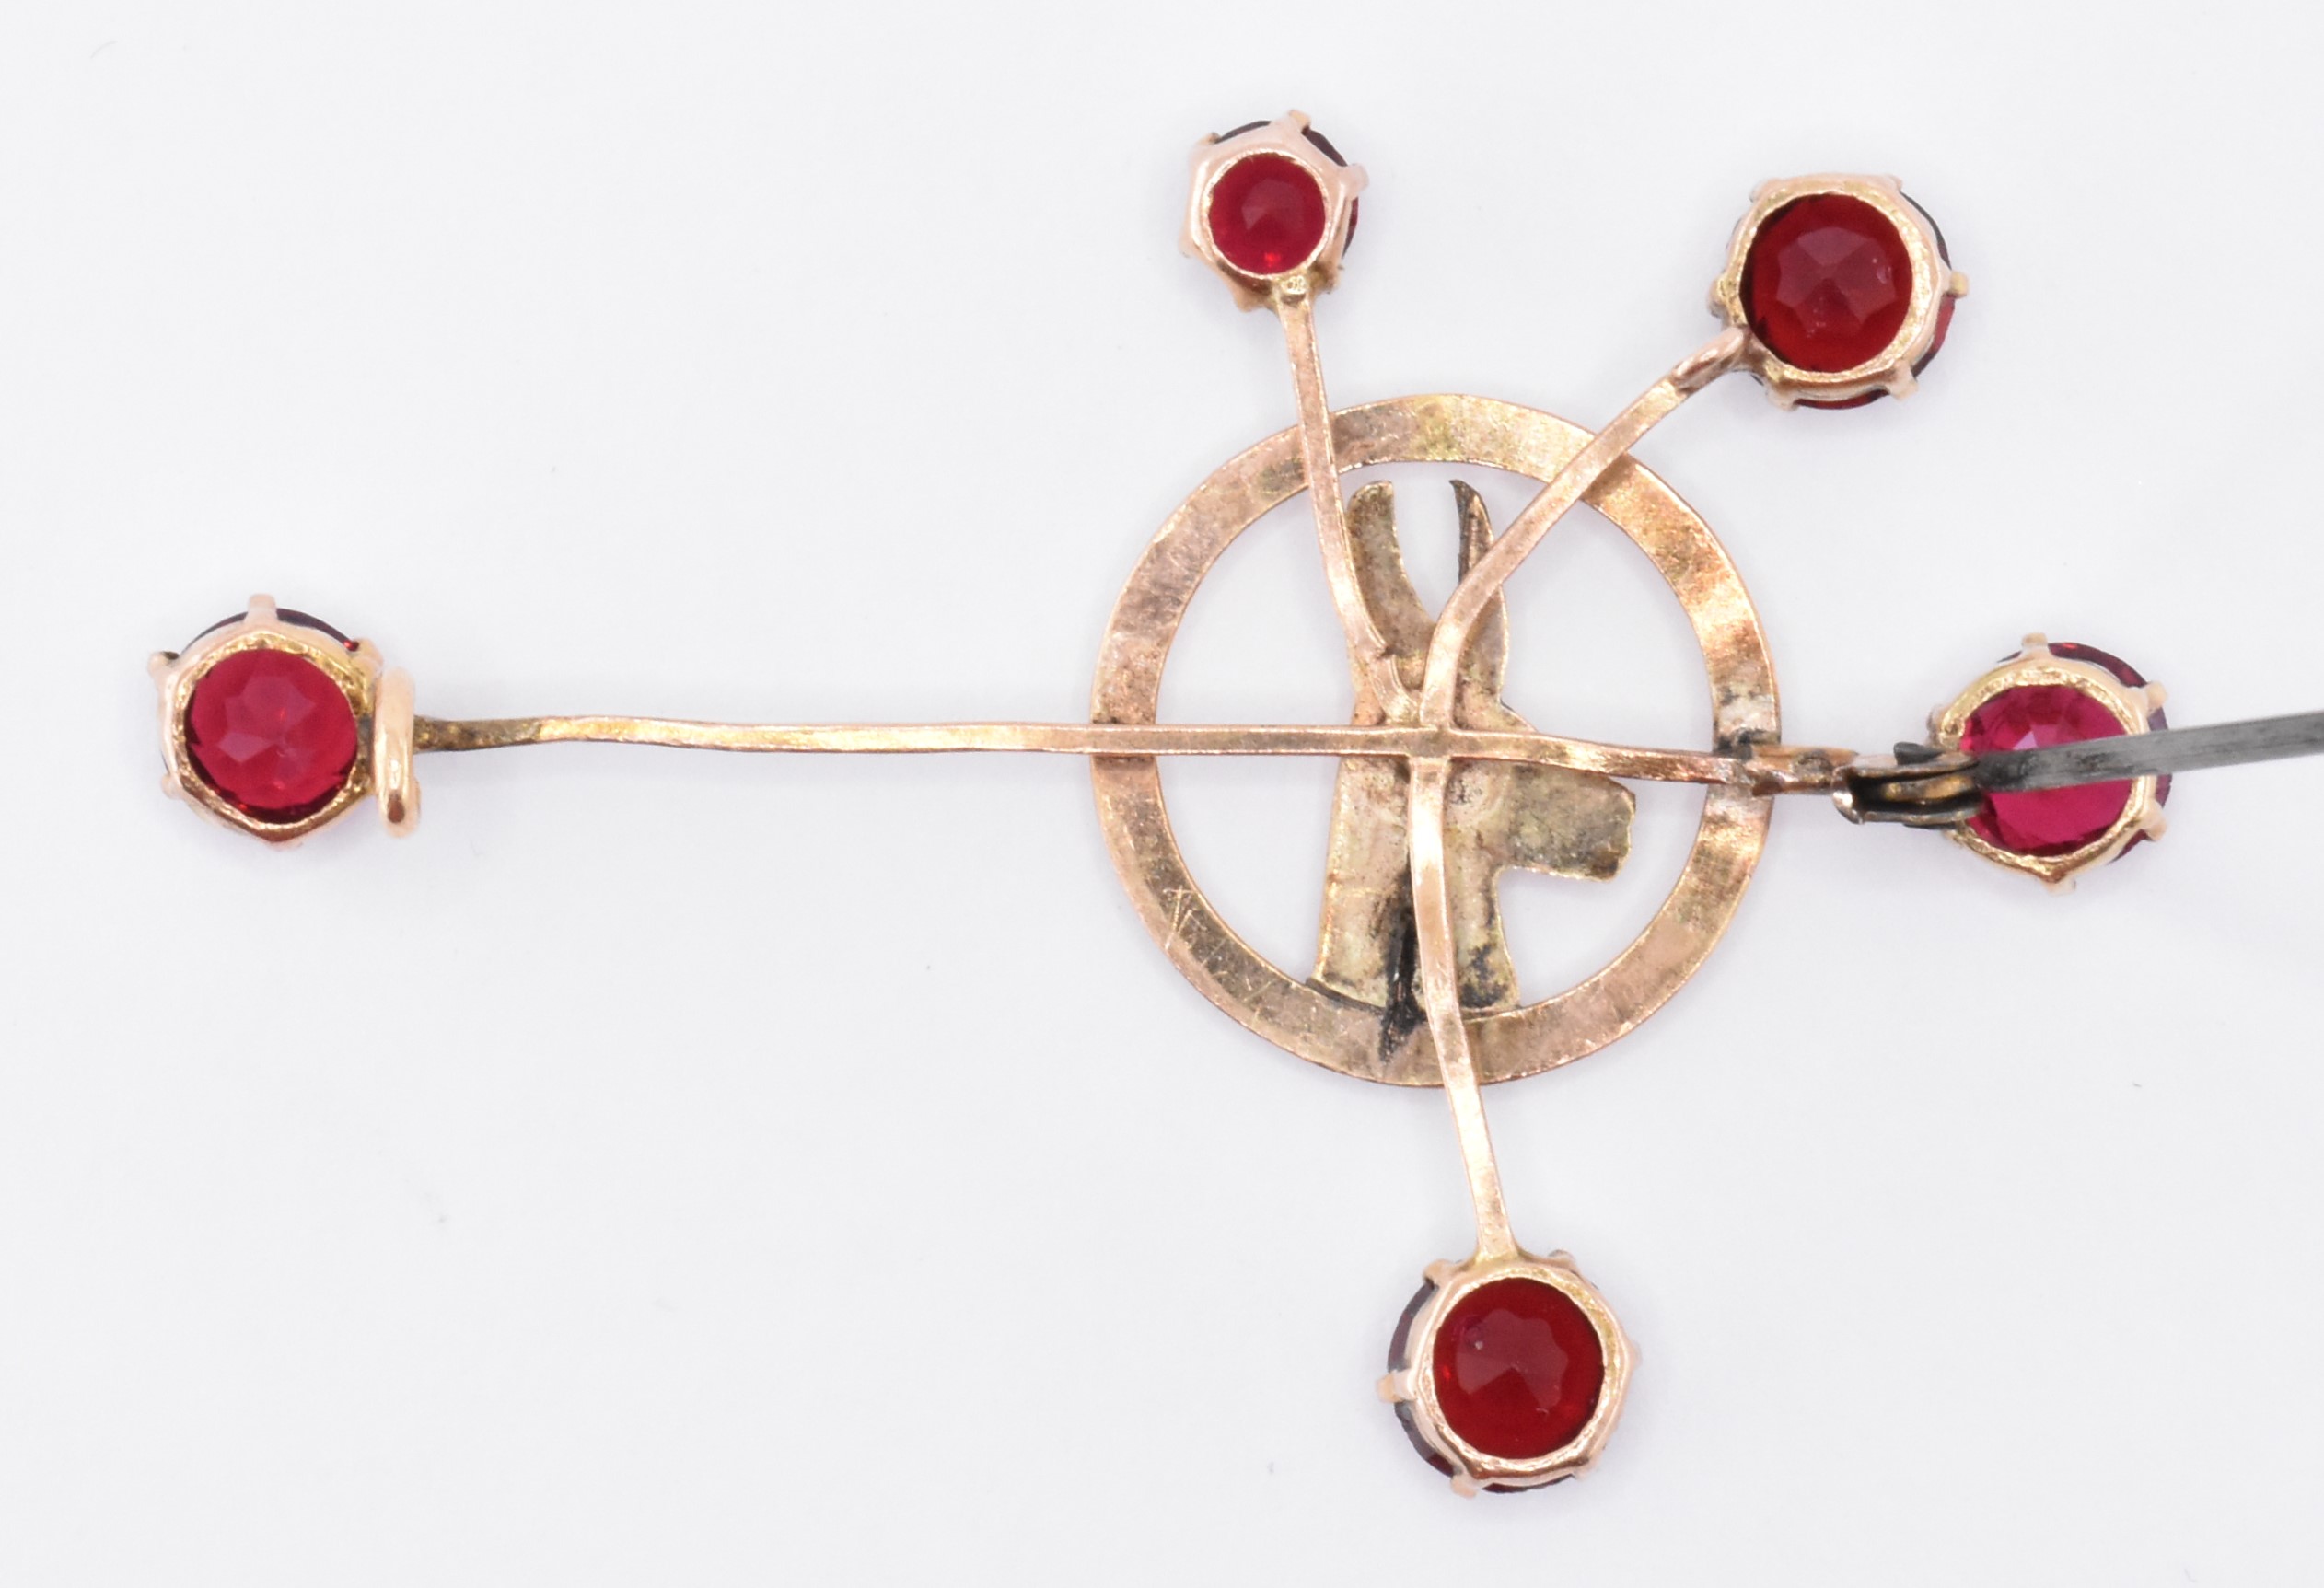 9CT GOLD & RED STONE SPRINGBOK BROOCH - Image 4 of 4